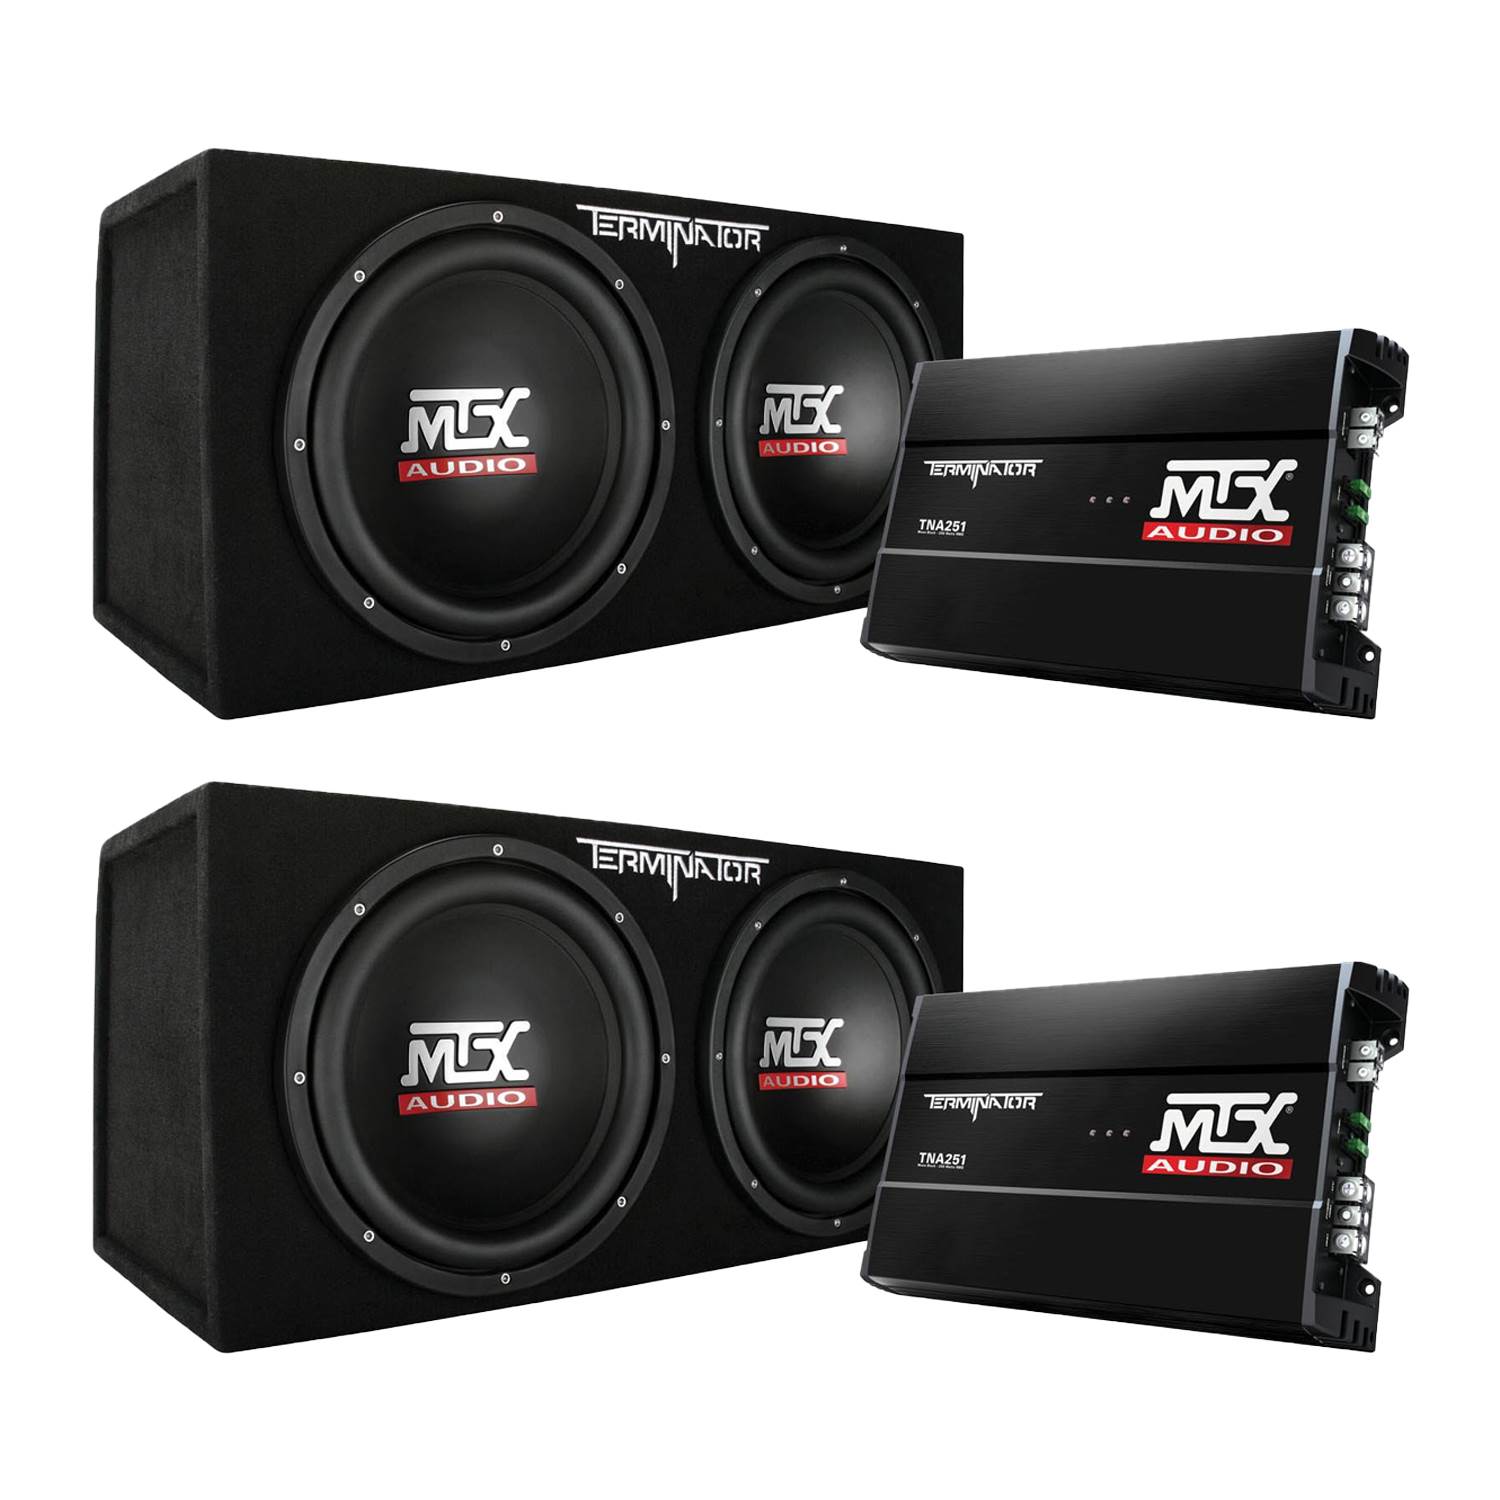 MTX 12" 1200W Dual Loaded Car Subwoofer Audio w/ Sub Box + Amplifier (2 Pack) - image 1 of 11